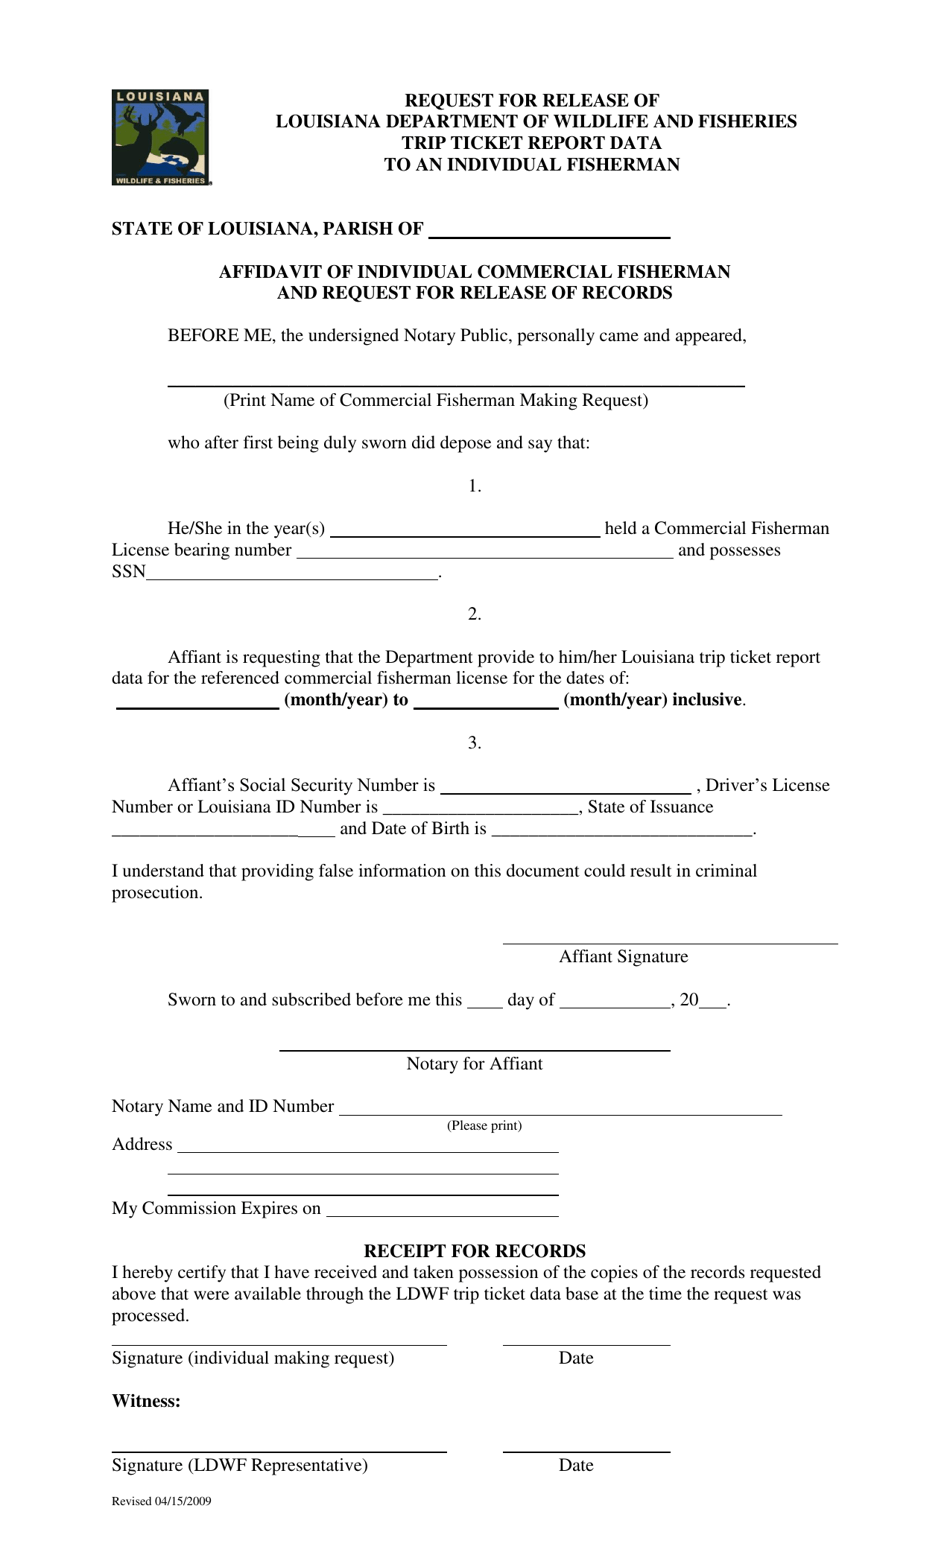 Request for Release of Louisiana Department of Wildlife and Fisheries Trip Ticket Report Data to an Individual Fisherman - Louisiana, Page 1